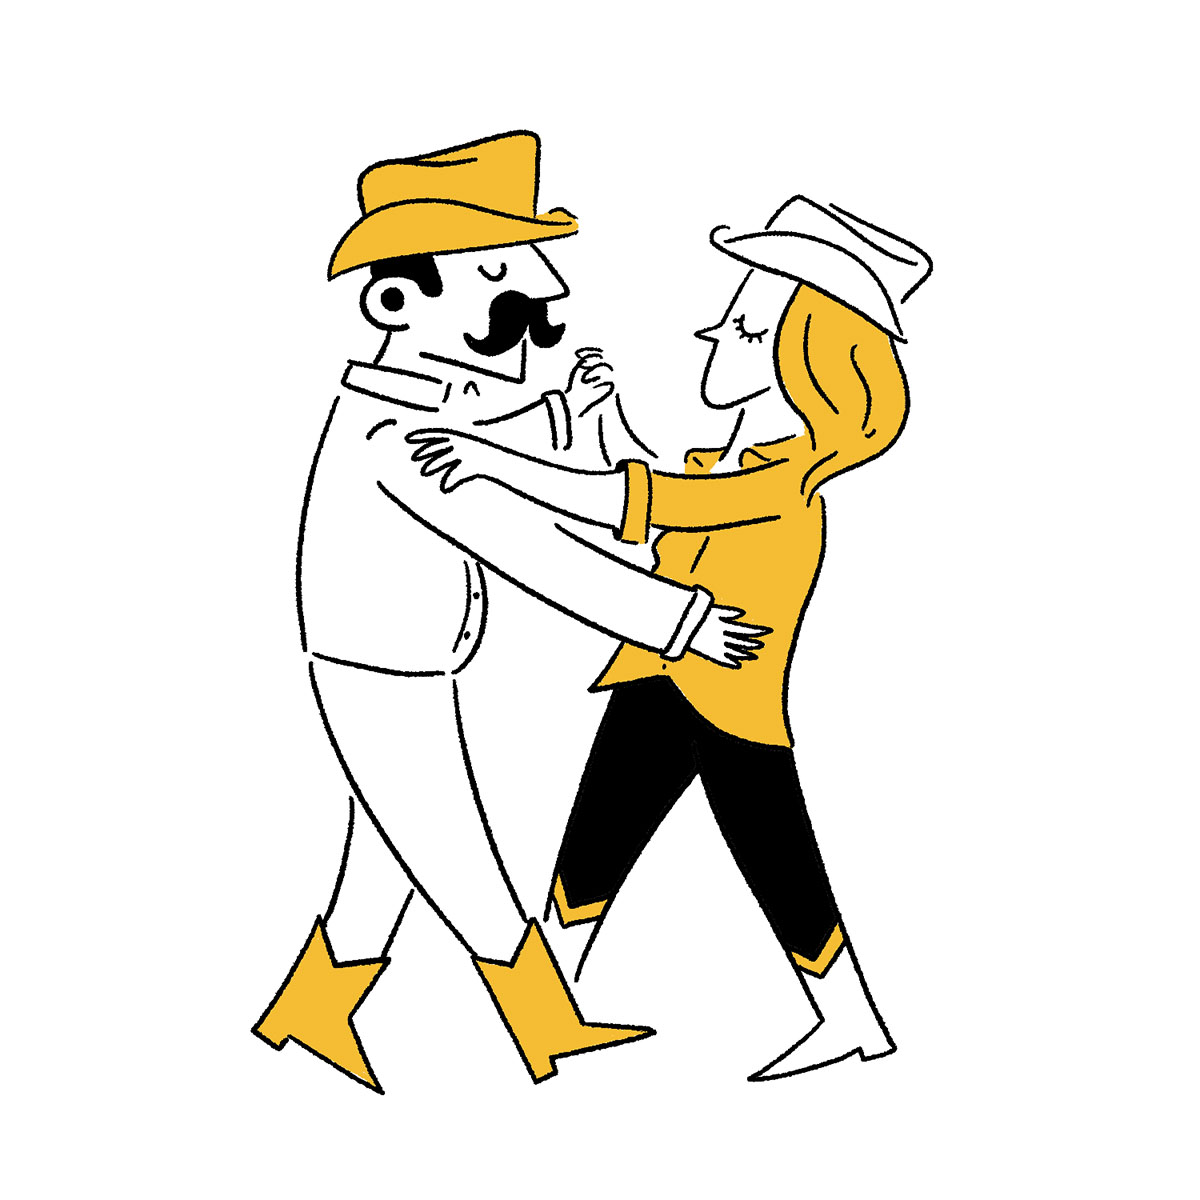 An illustration of two people dancing